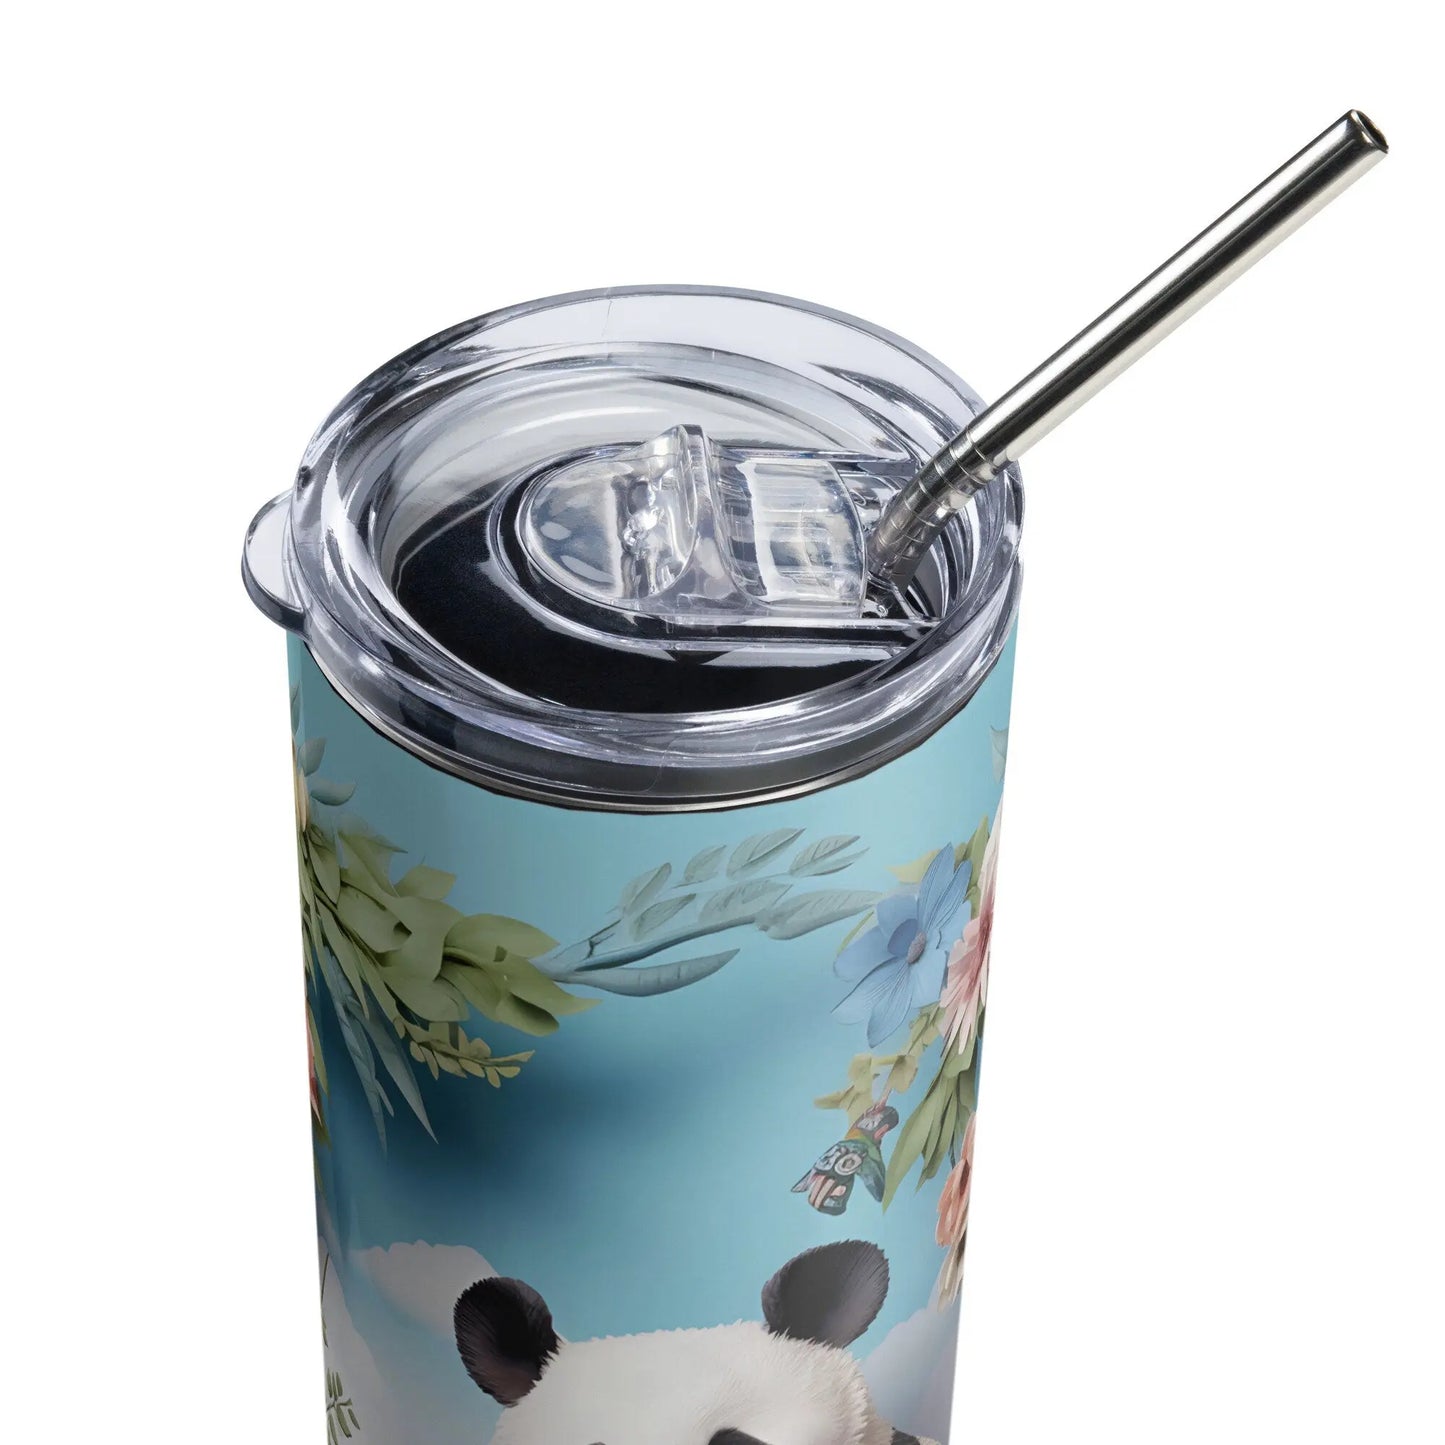 3D Embroidered Cute Panda Sublimation Tumbler Gift for Panda Lovers